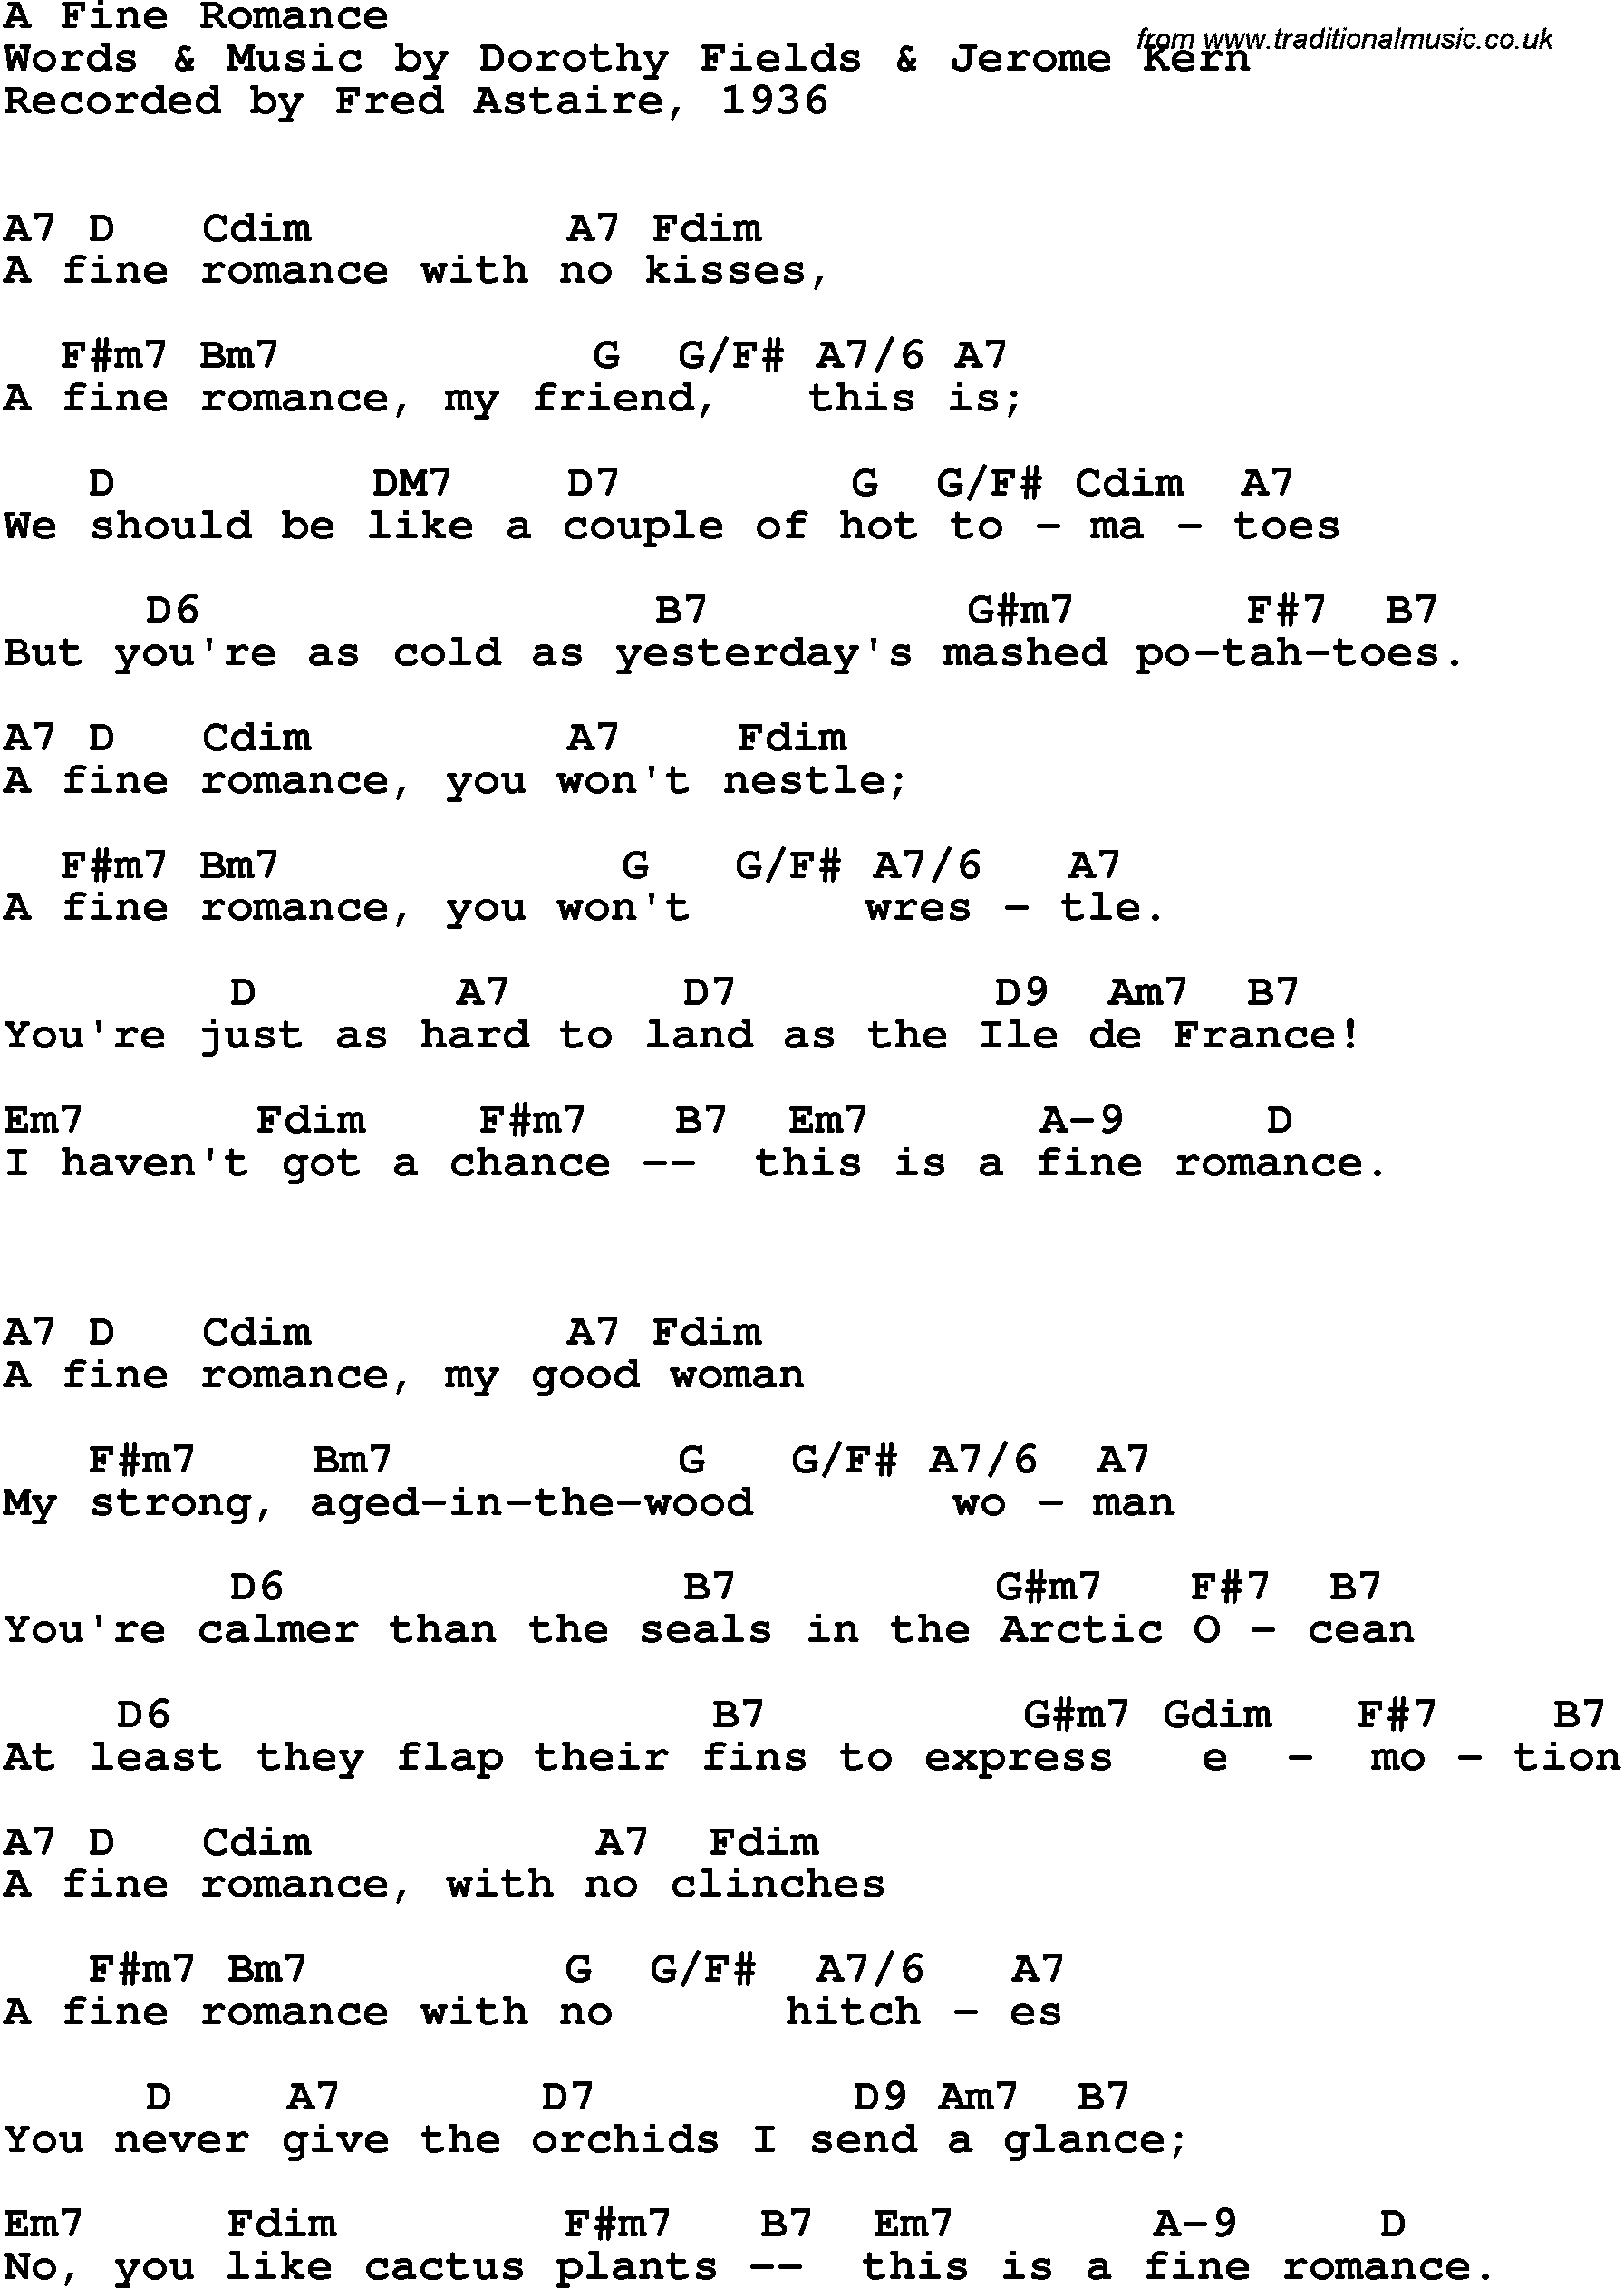 Song Lyrics with guitar chords for A Fine Romance - Fred Astaire, 1936